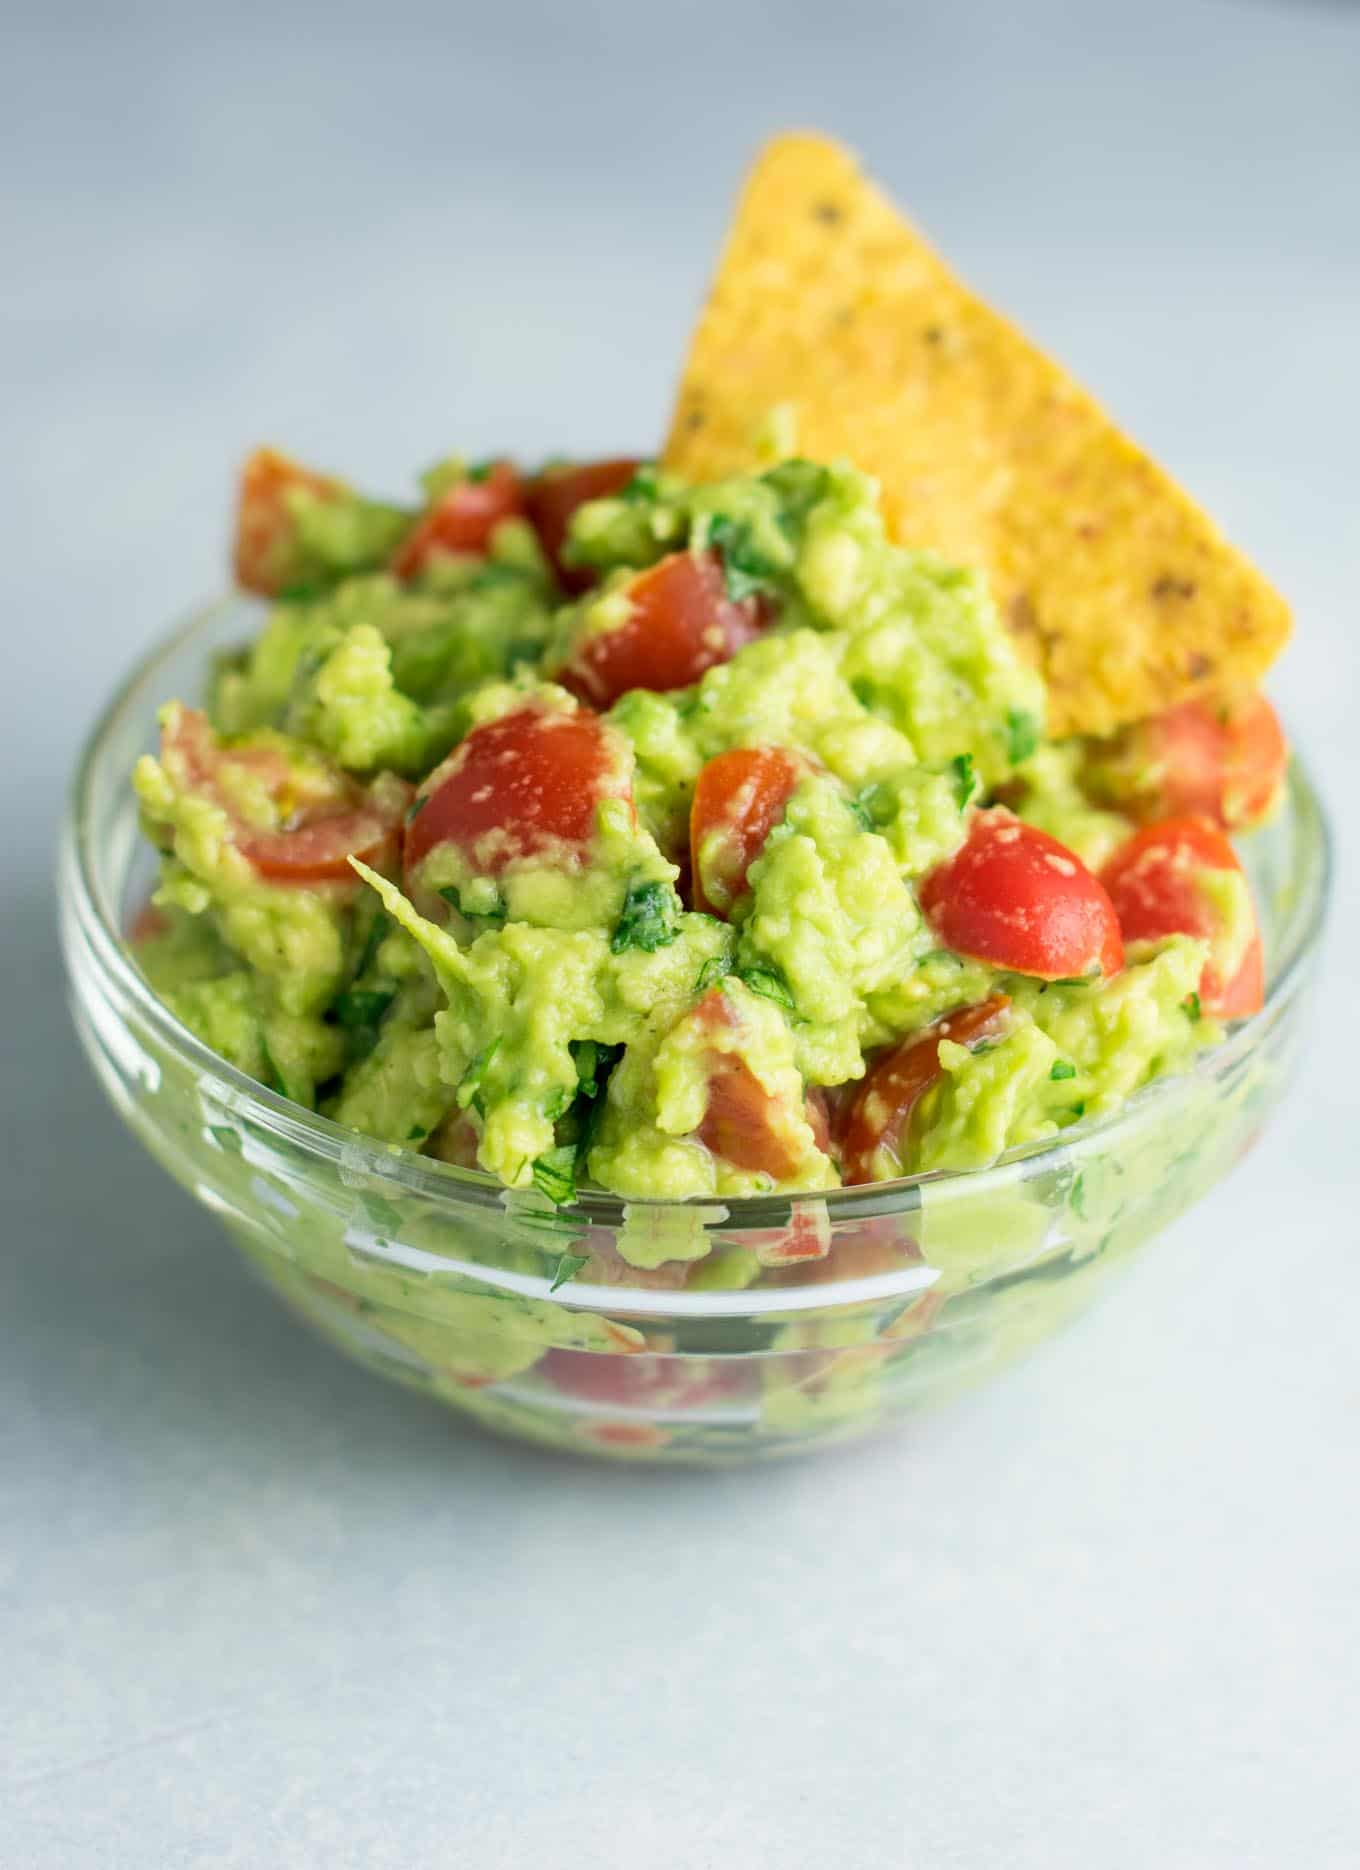 Best Guacamole Recipe with Tomatoes - Build Your Bite